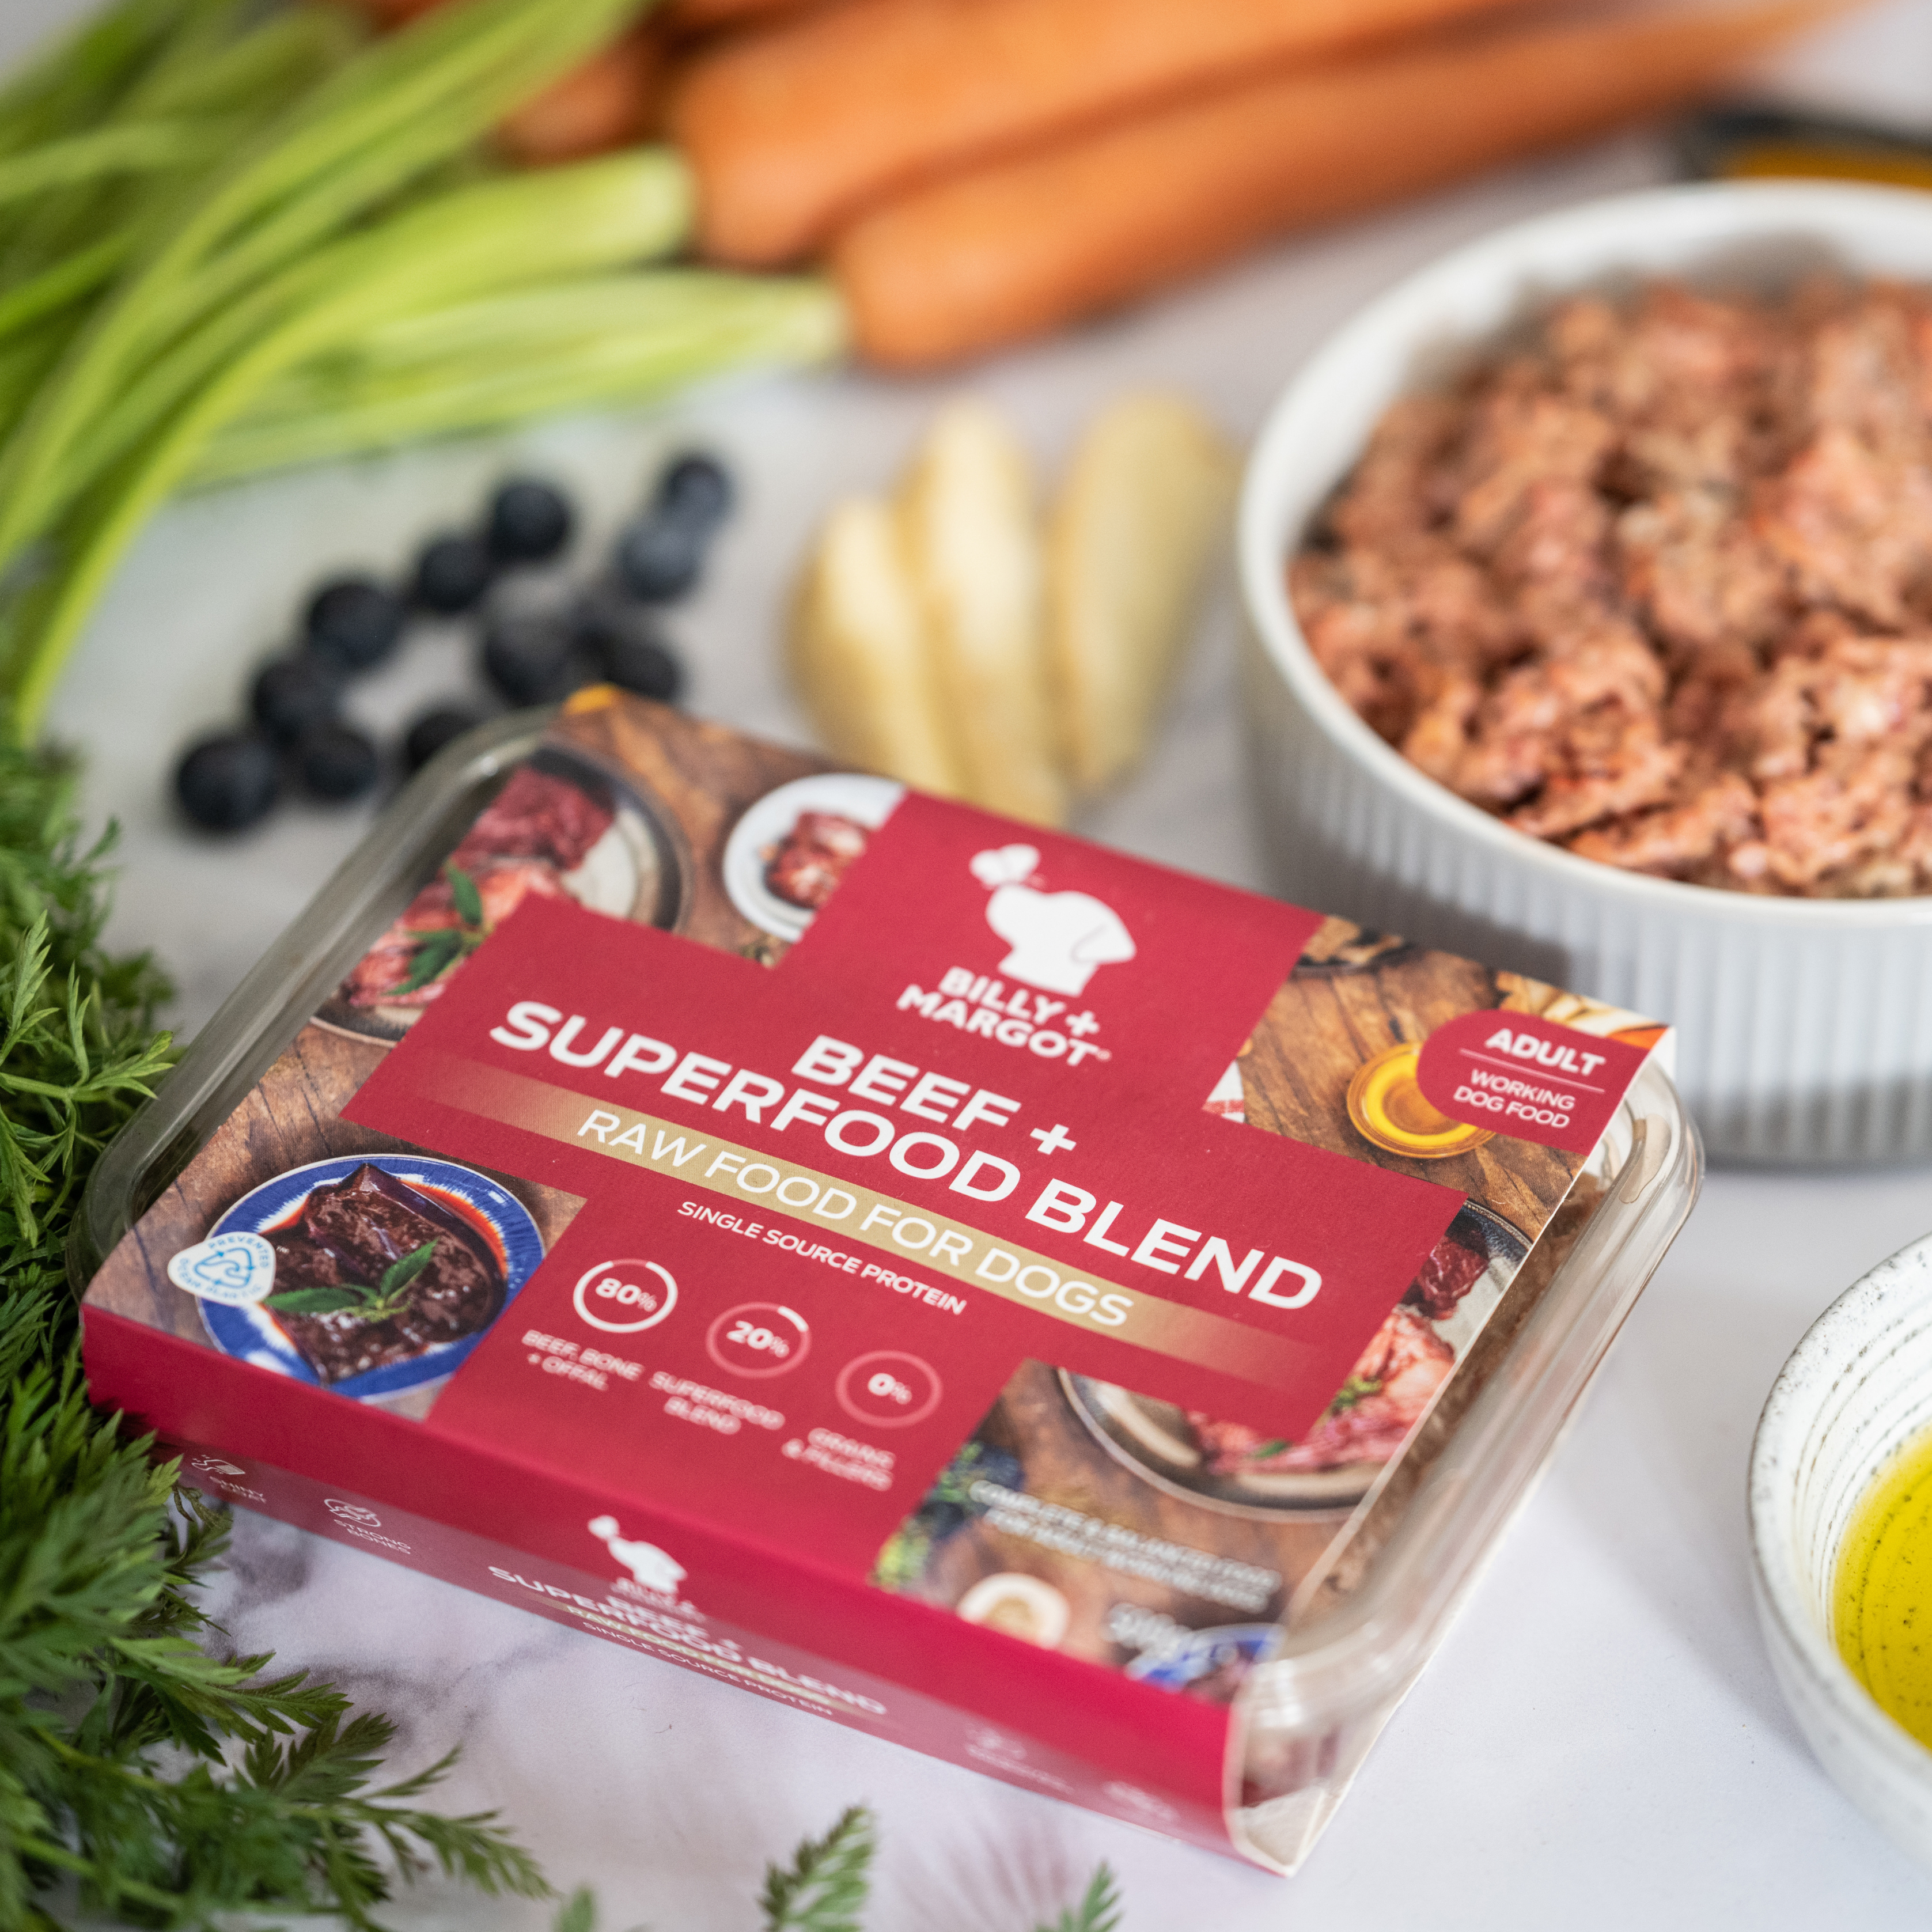 natural beef complete raw dog food ingredients with beef prime cuts of meat, bone, offal and natural vegetables and superfood